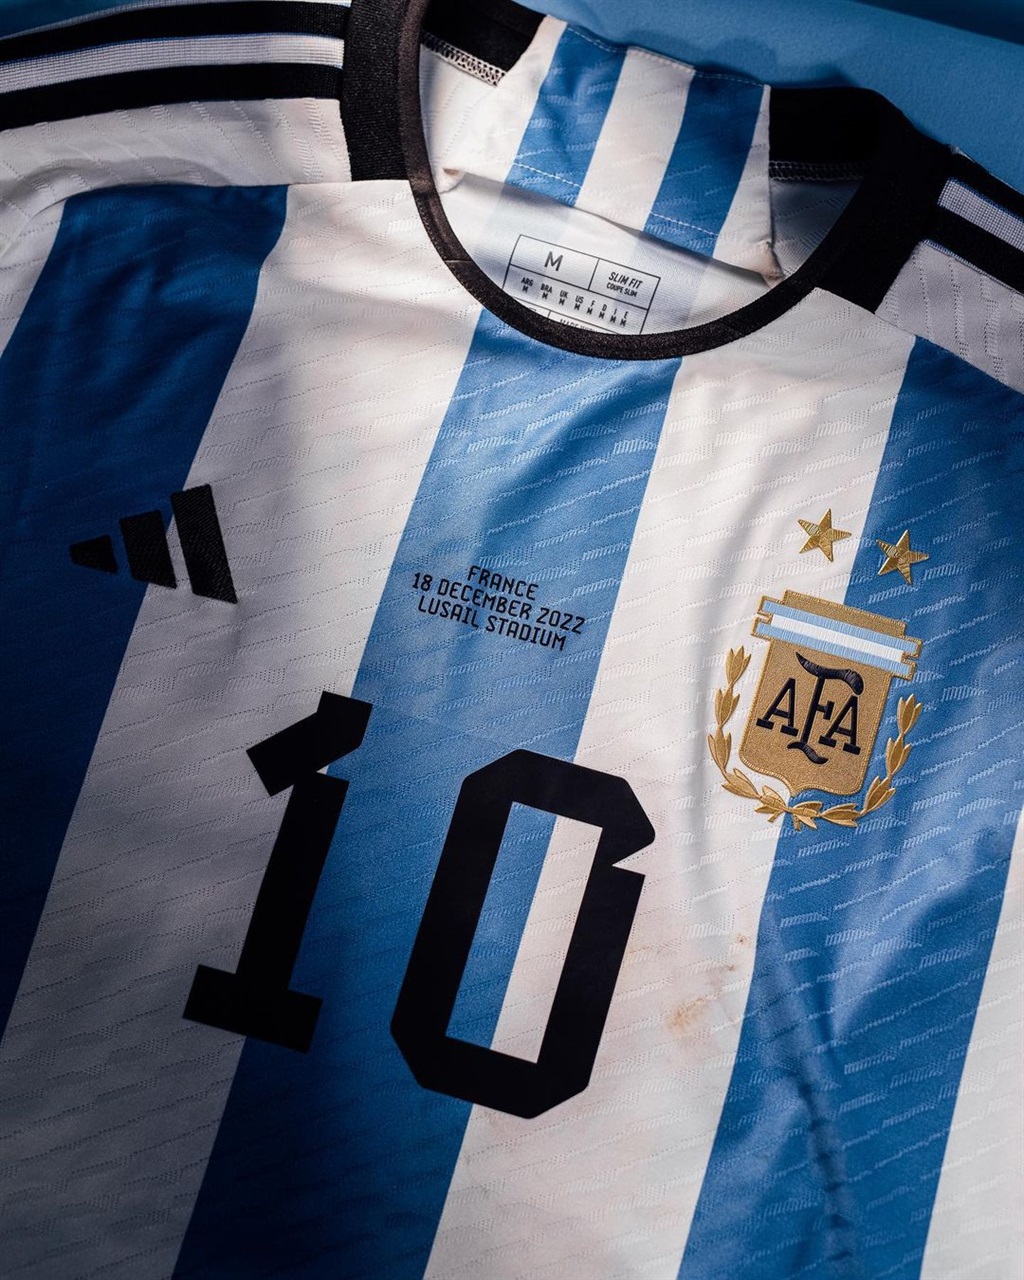 Lionel Messi's World Cup match jerseys are reporte